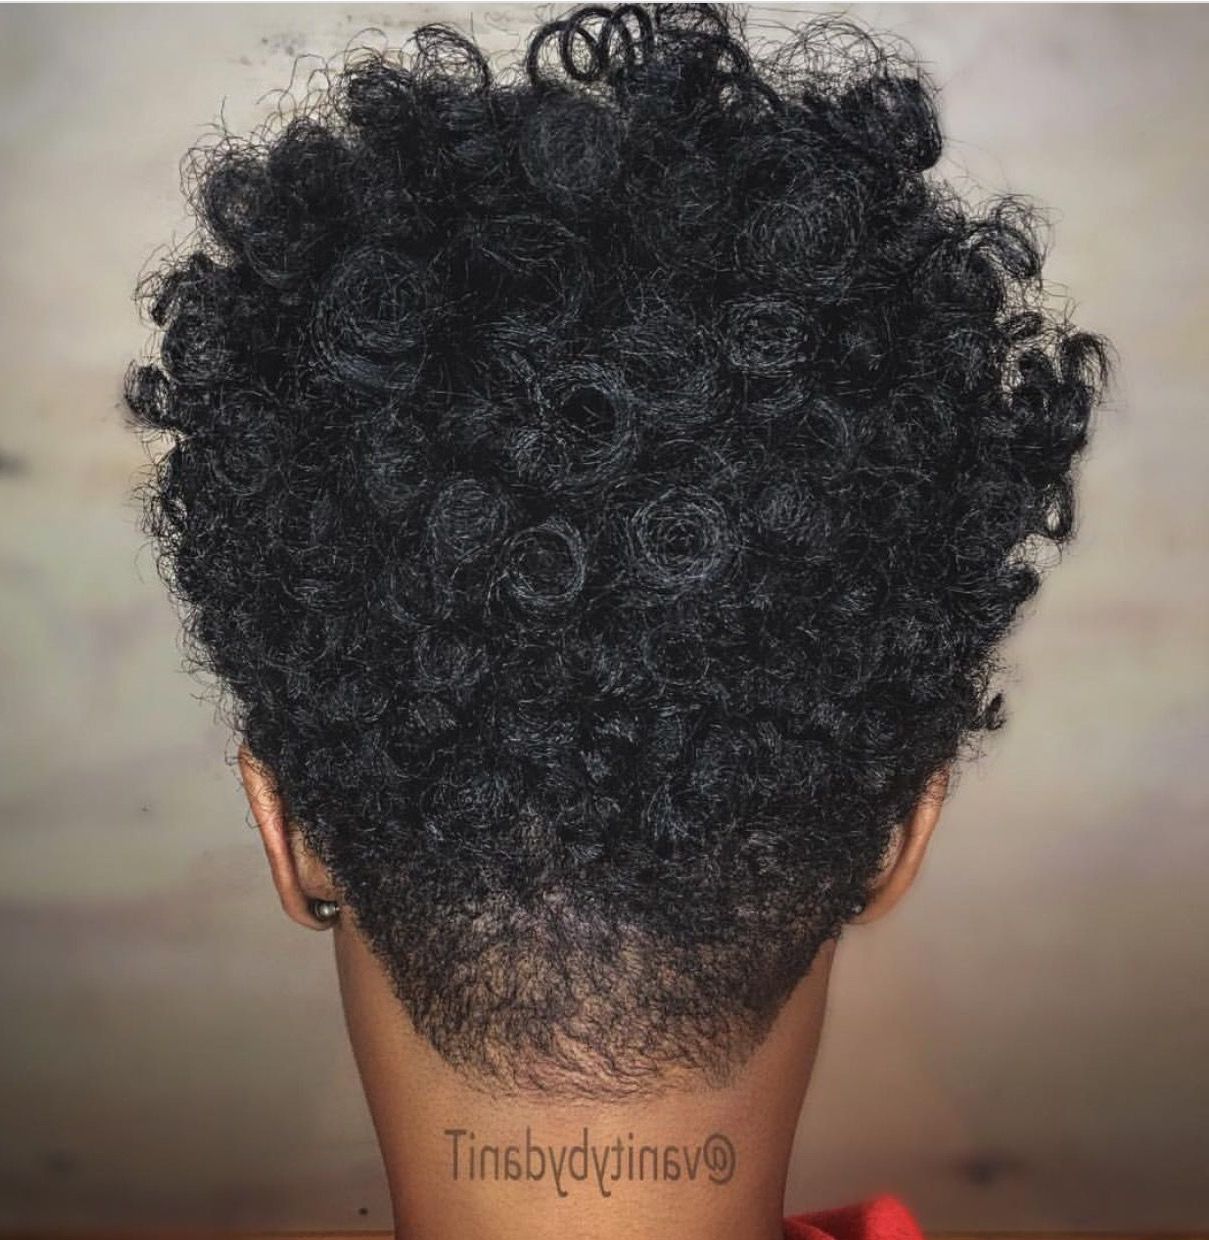 Pinobsessed Hair Oil On Black Hairstyles | Pinterest | Natural Throughout Curly Black Tapered Pixie Hairstyles (View 15 of 25)